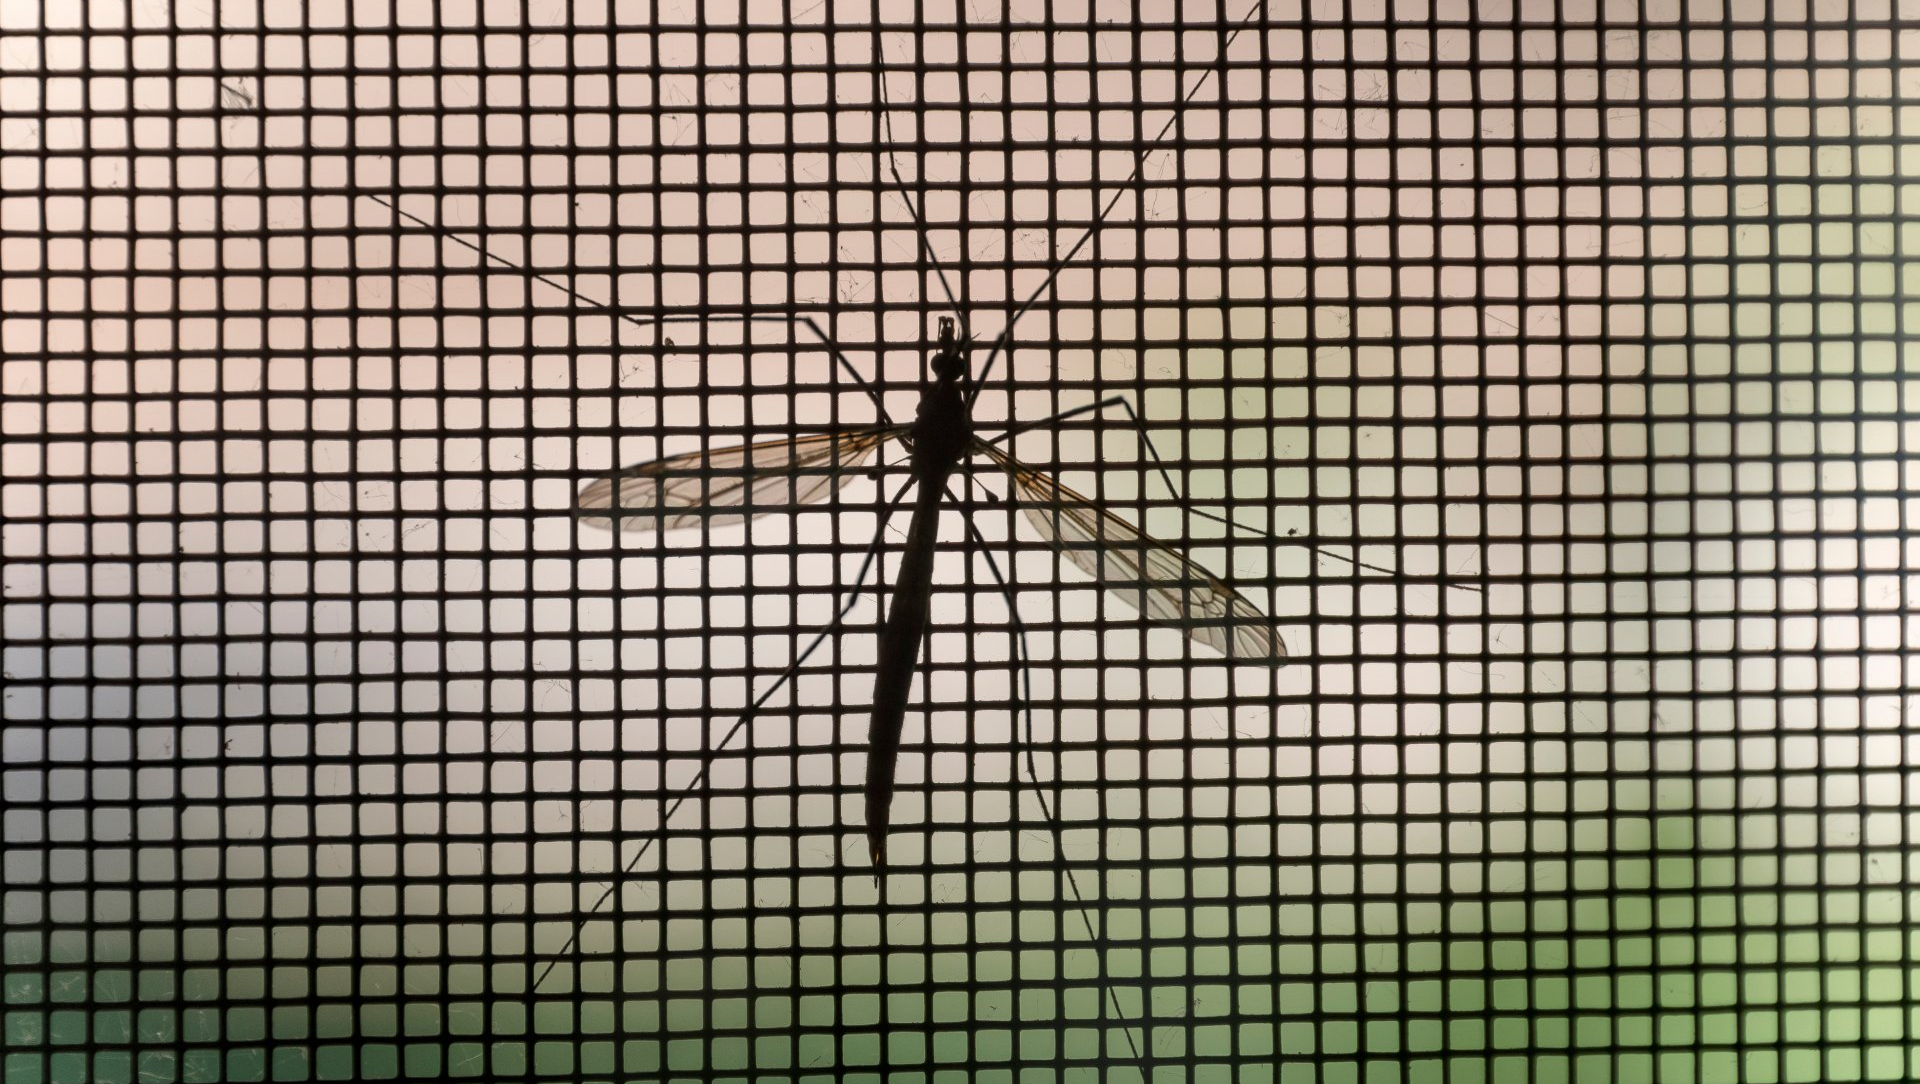 window screen with mosquito on it.